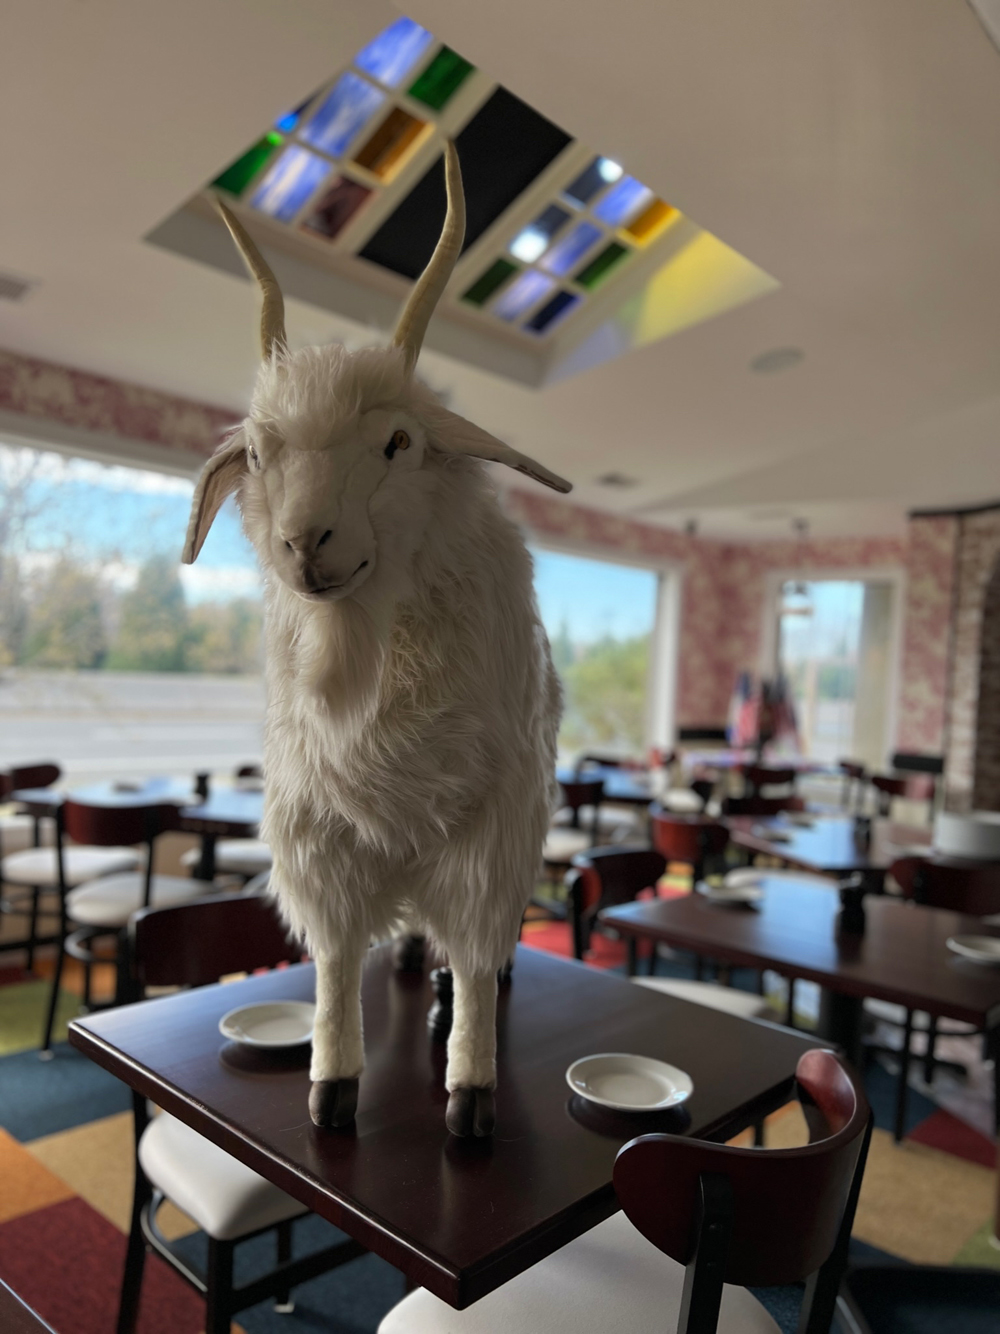 About - THE GOAT by David Burke